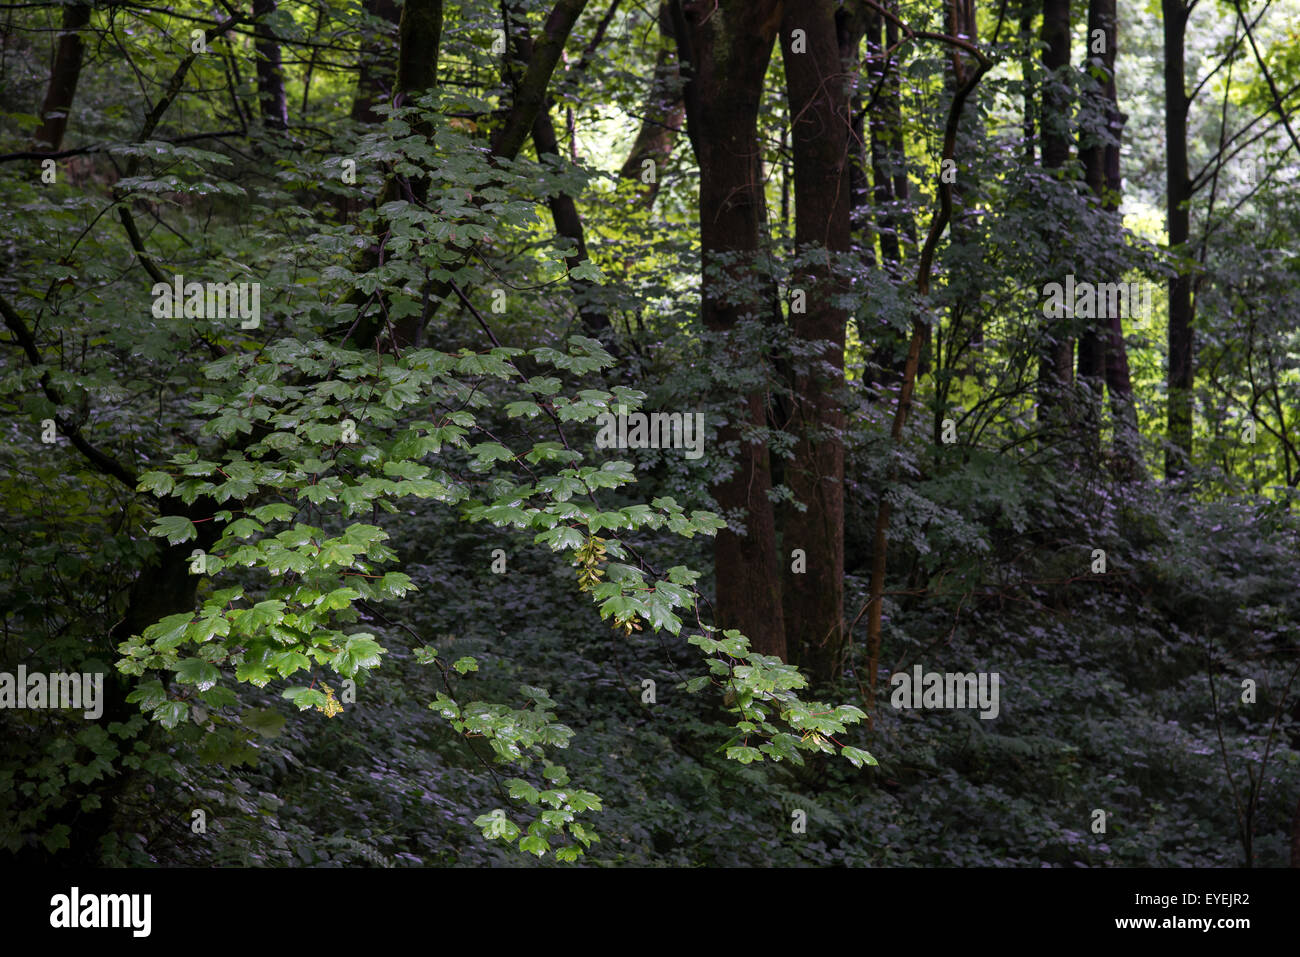 Greenery in an English woodland in summer. Sycamore trees and brambles. Stock Photo